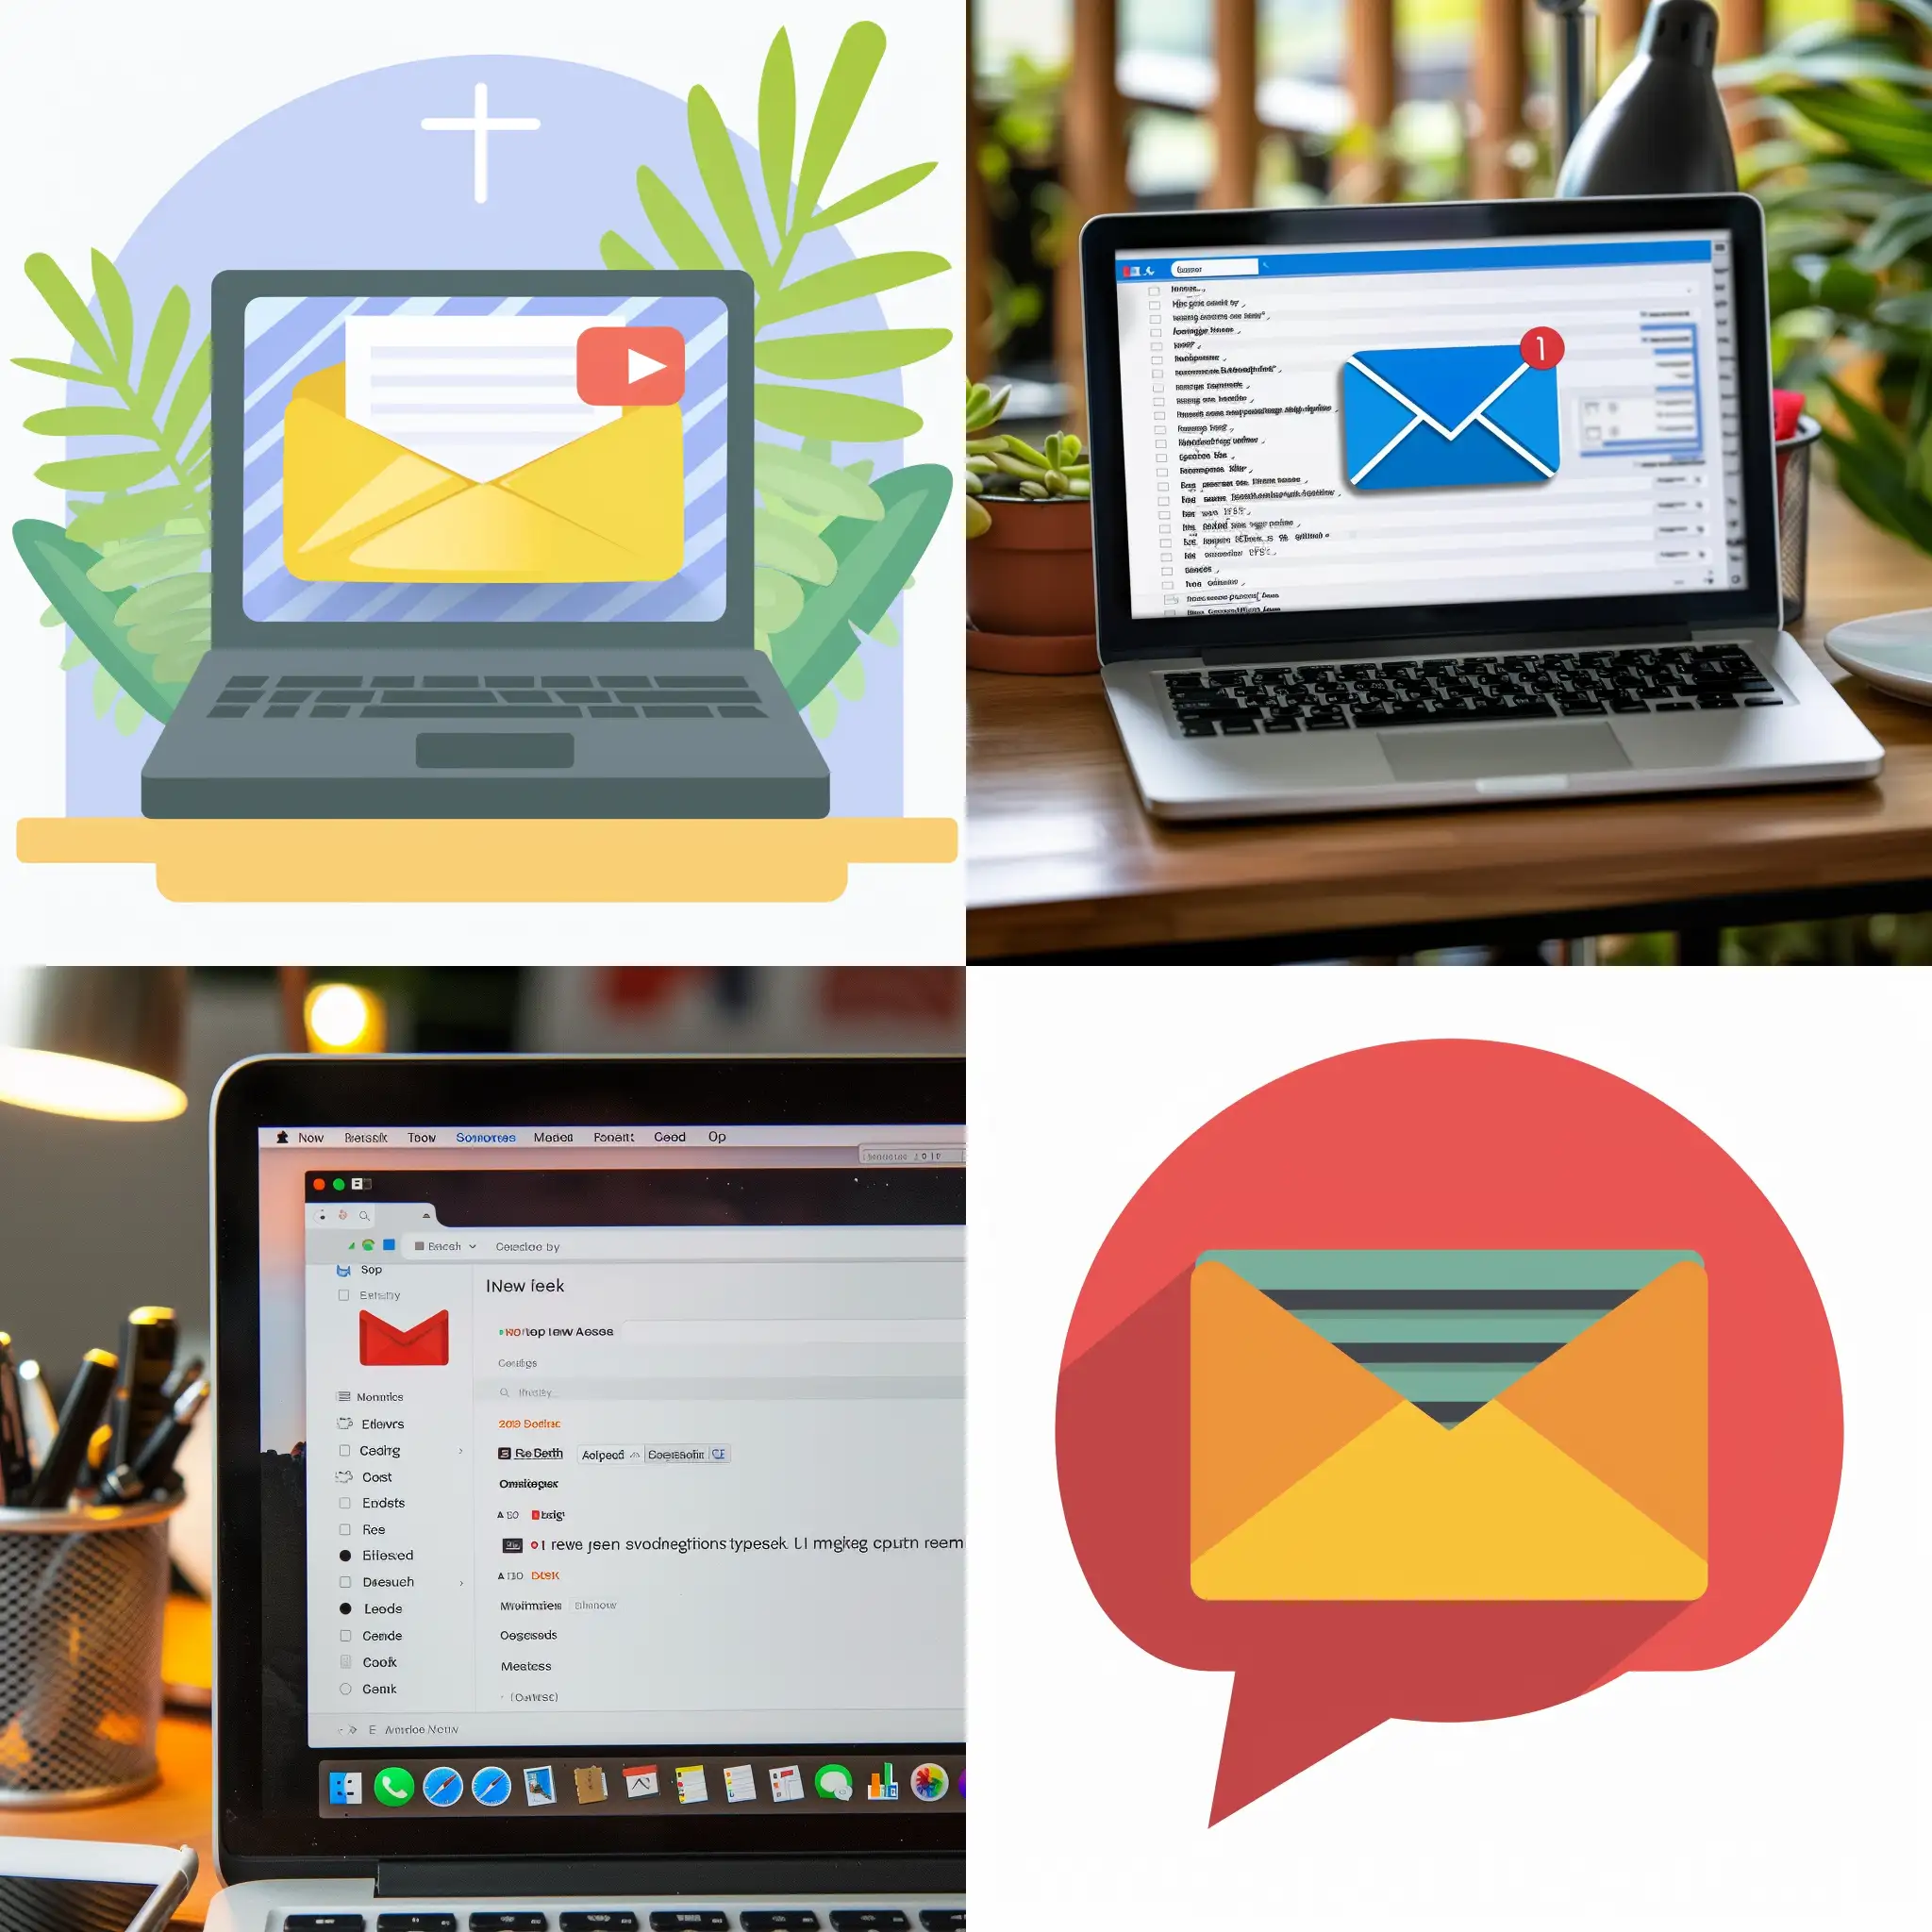 Email Client, new leads